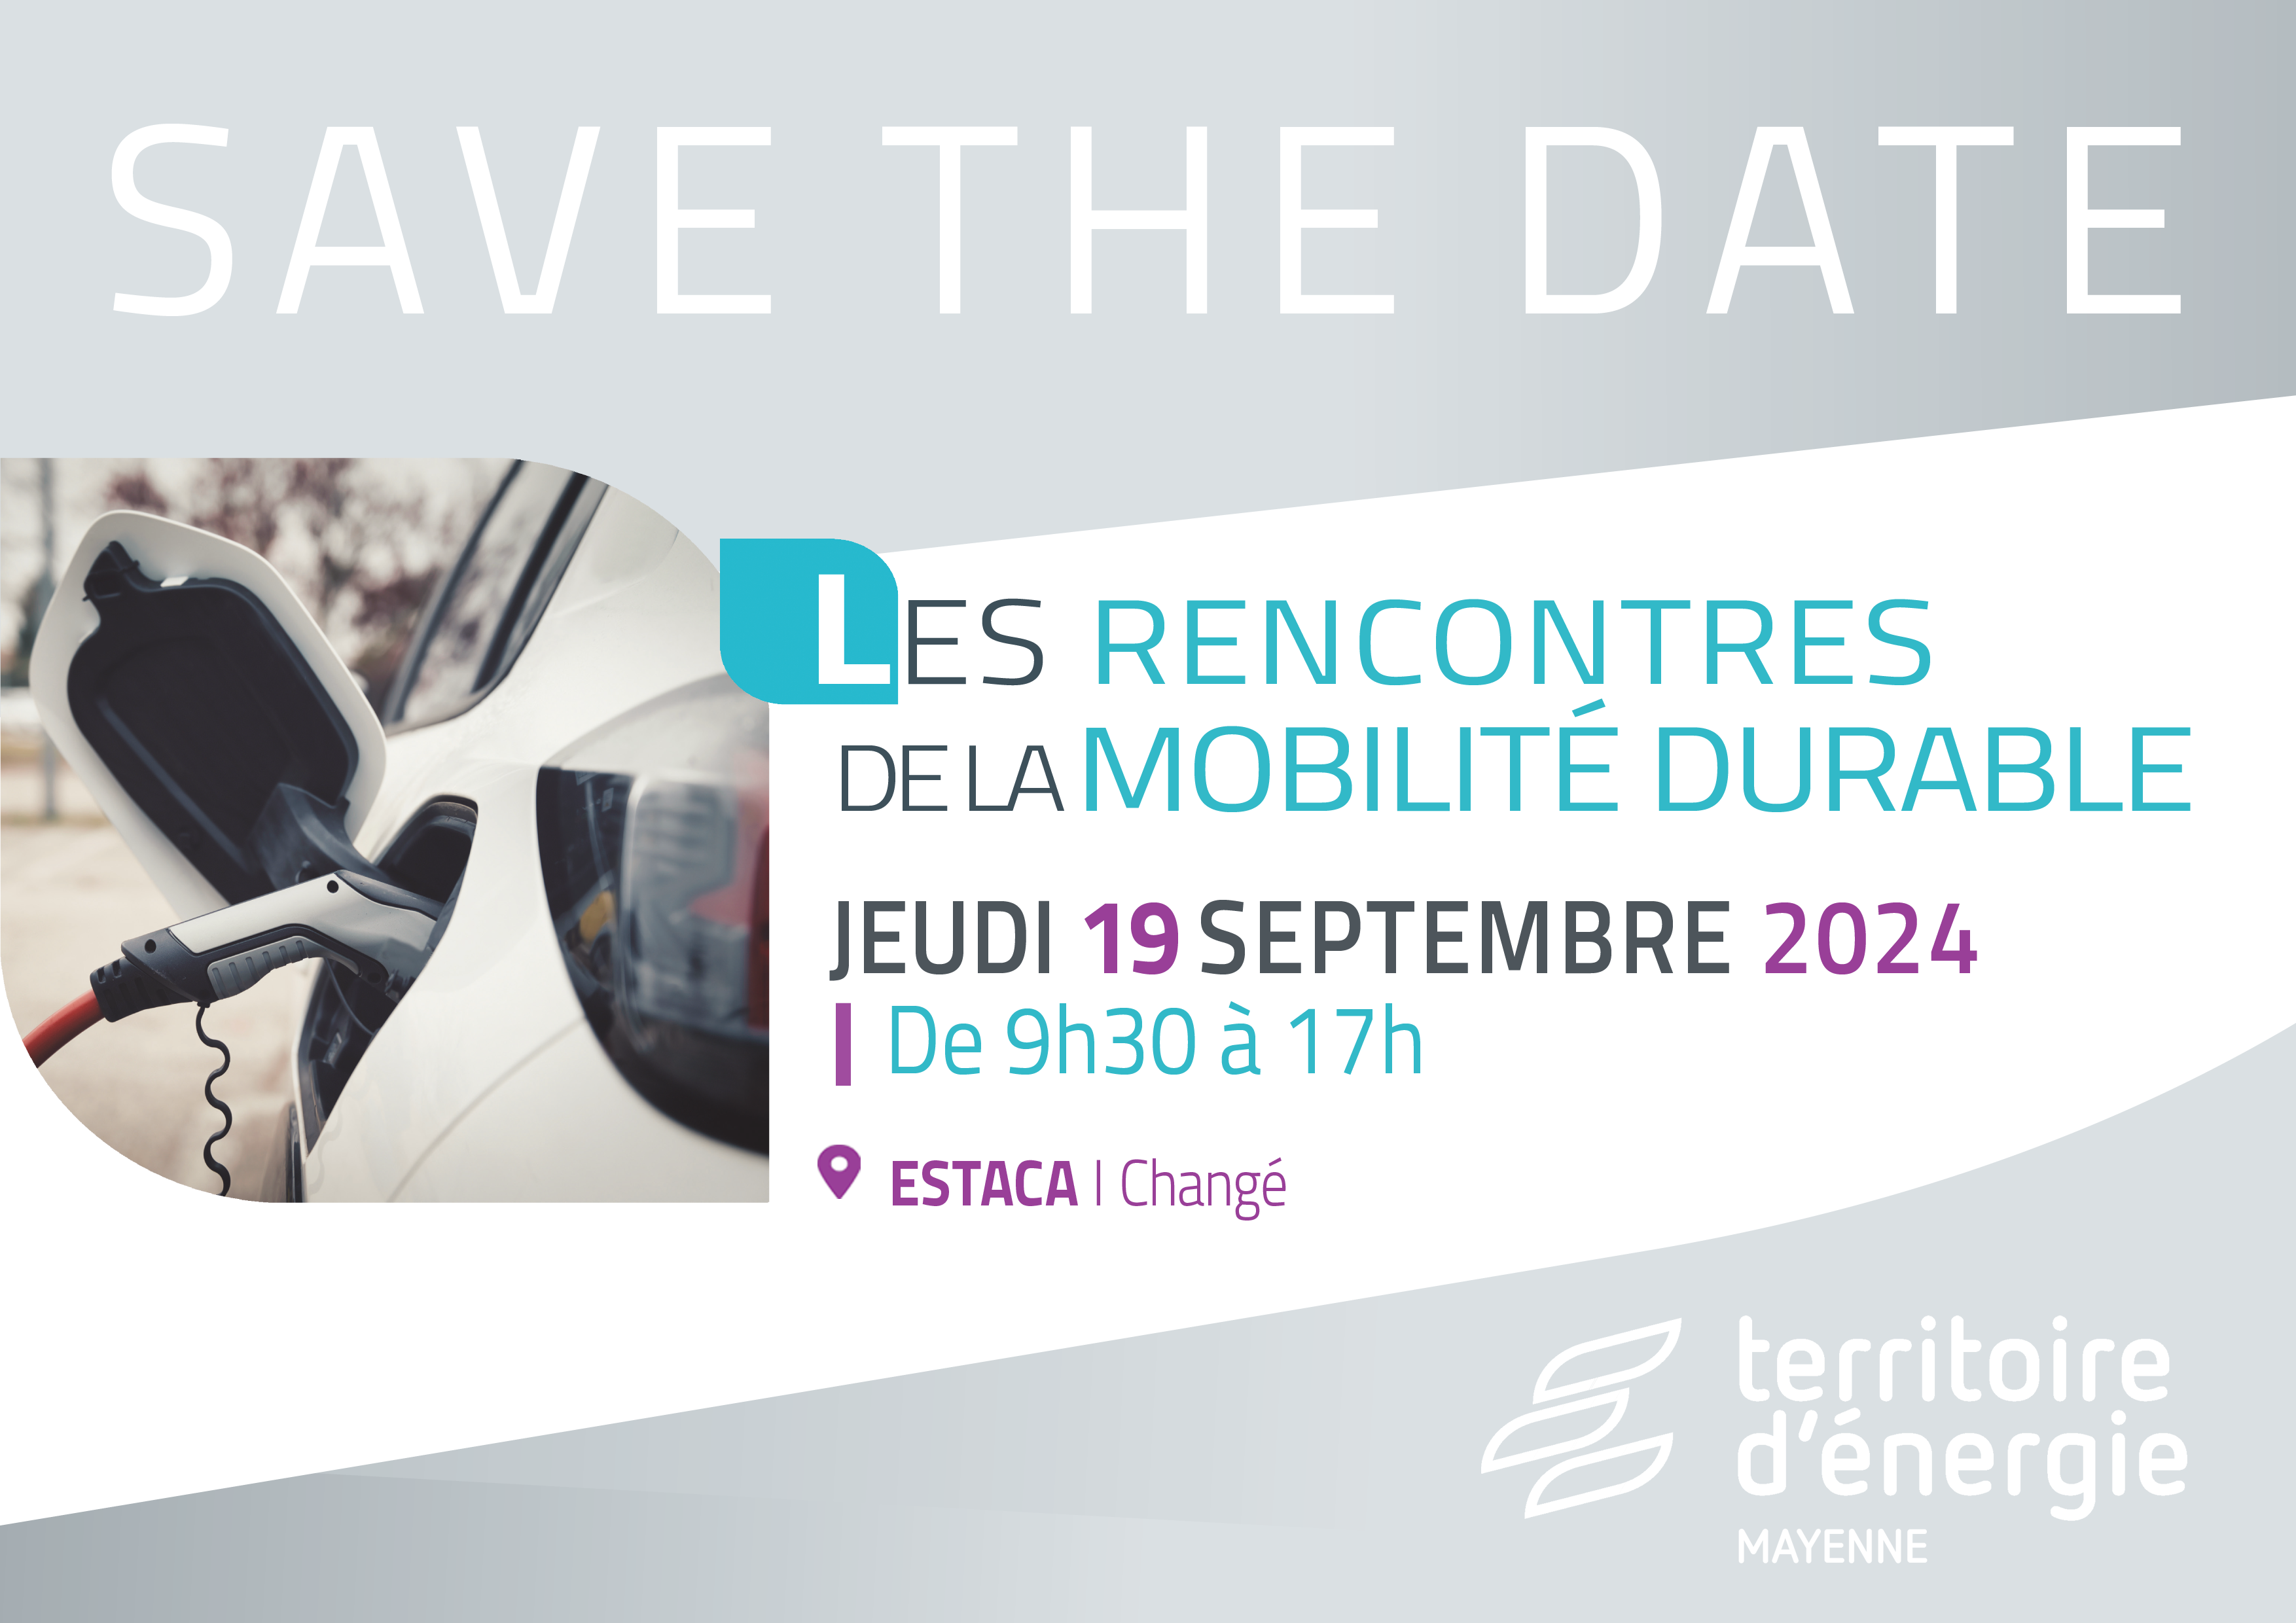 visuel save the date rencontres mobilite durable